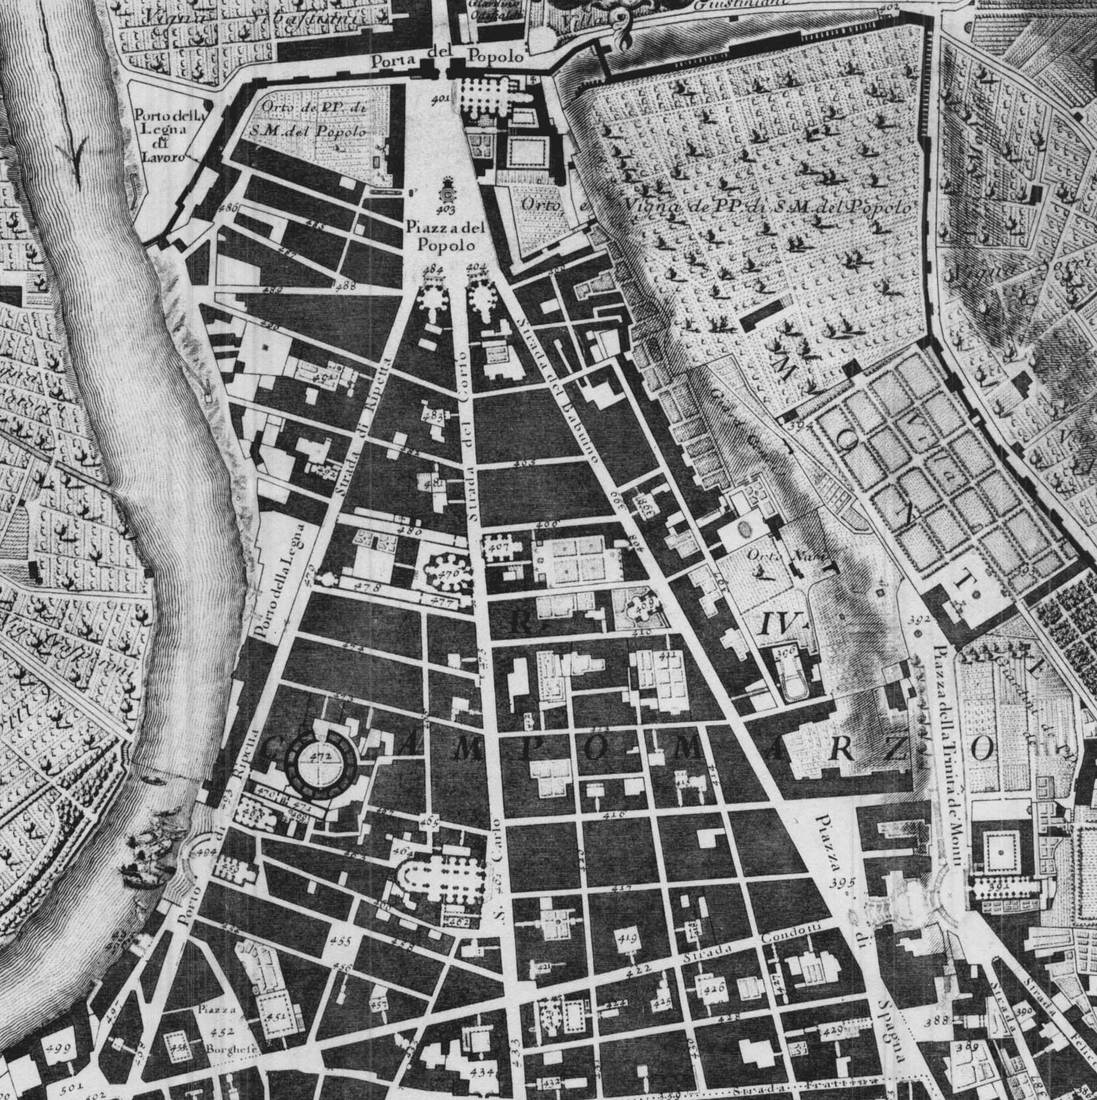 Map of northern Rome Piazza del Popolo by Nolli